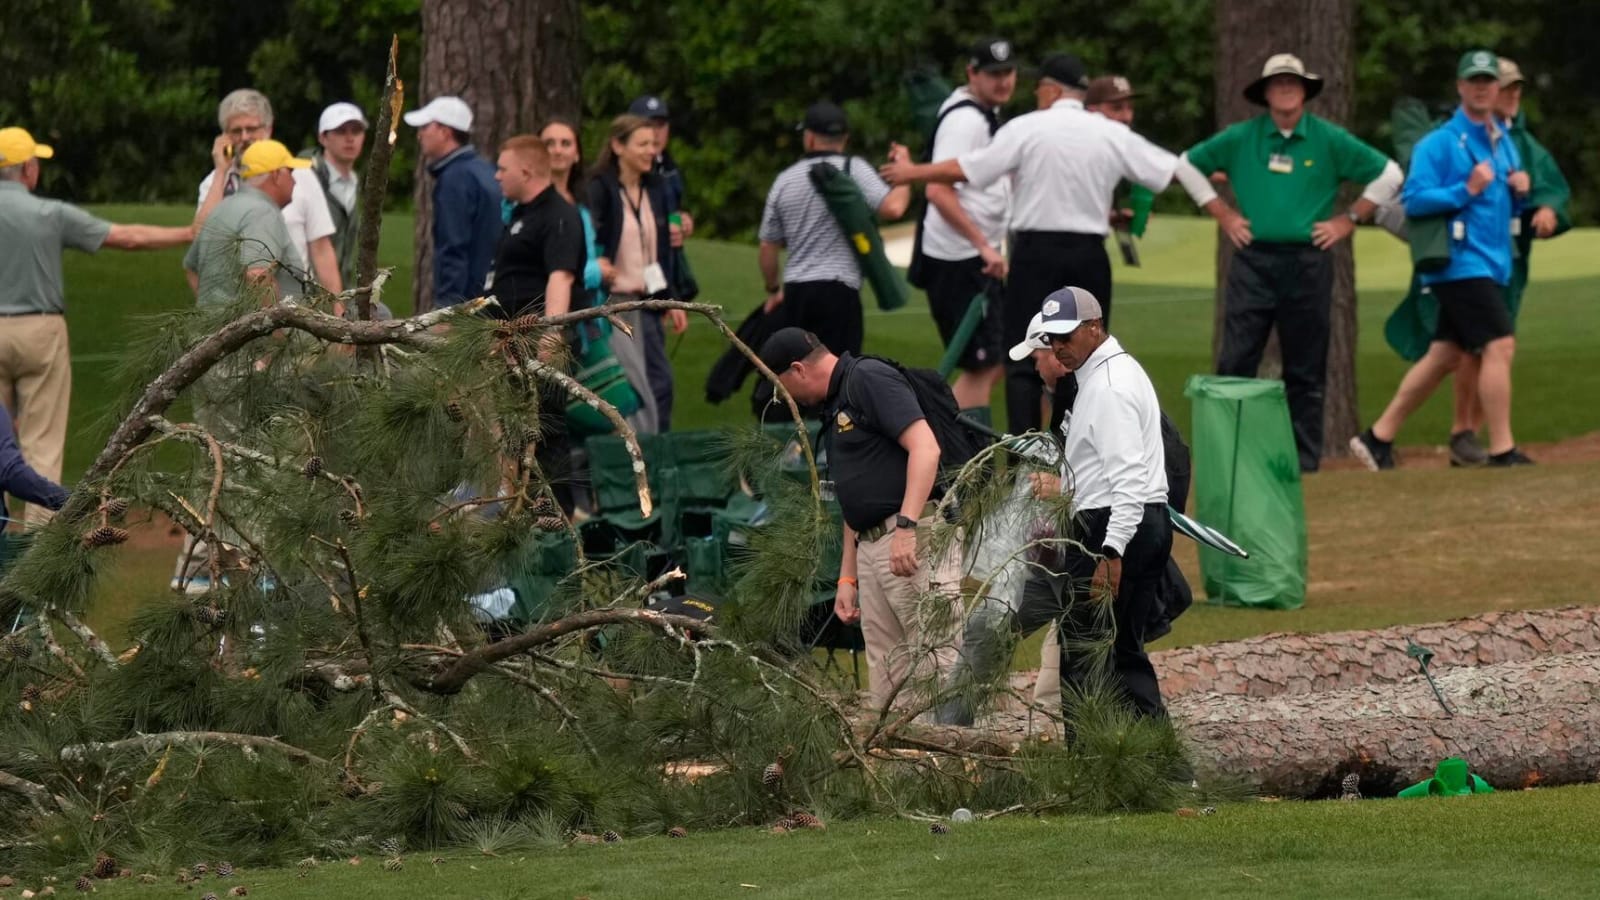 Tree nearly falls on spectators at Masters in scary incident